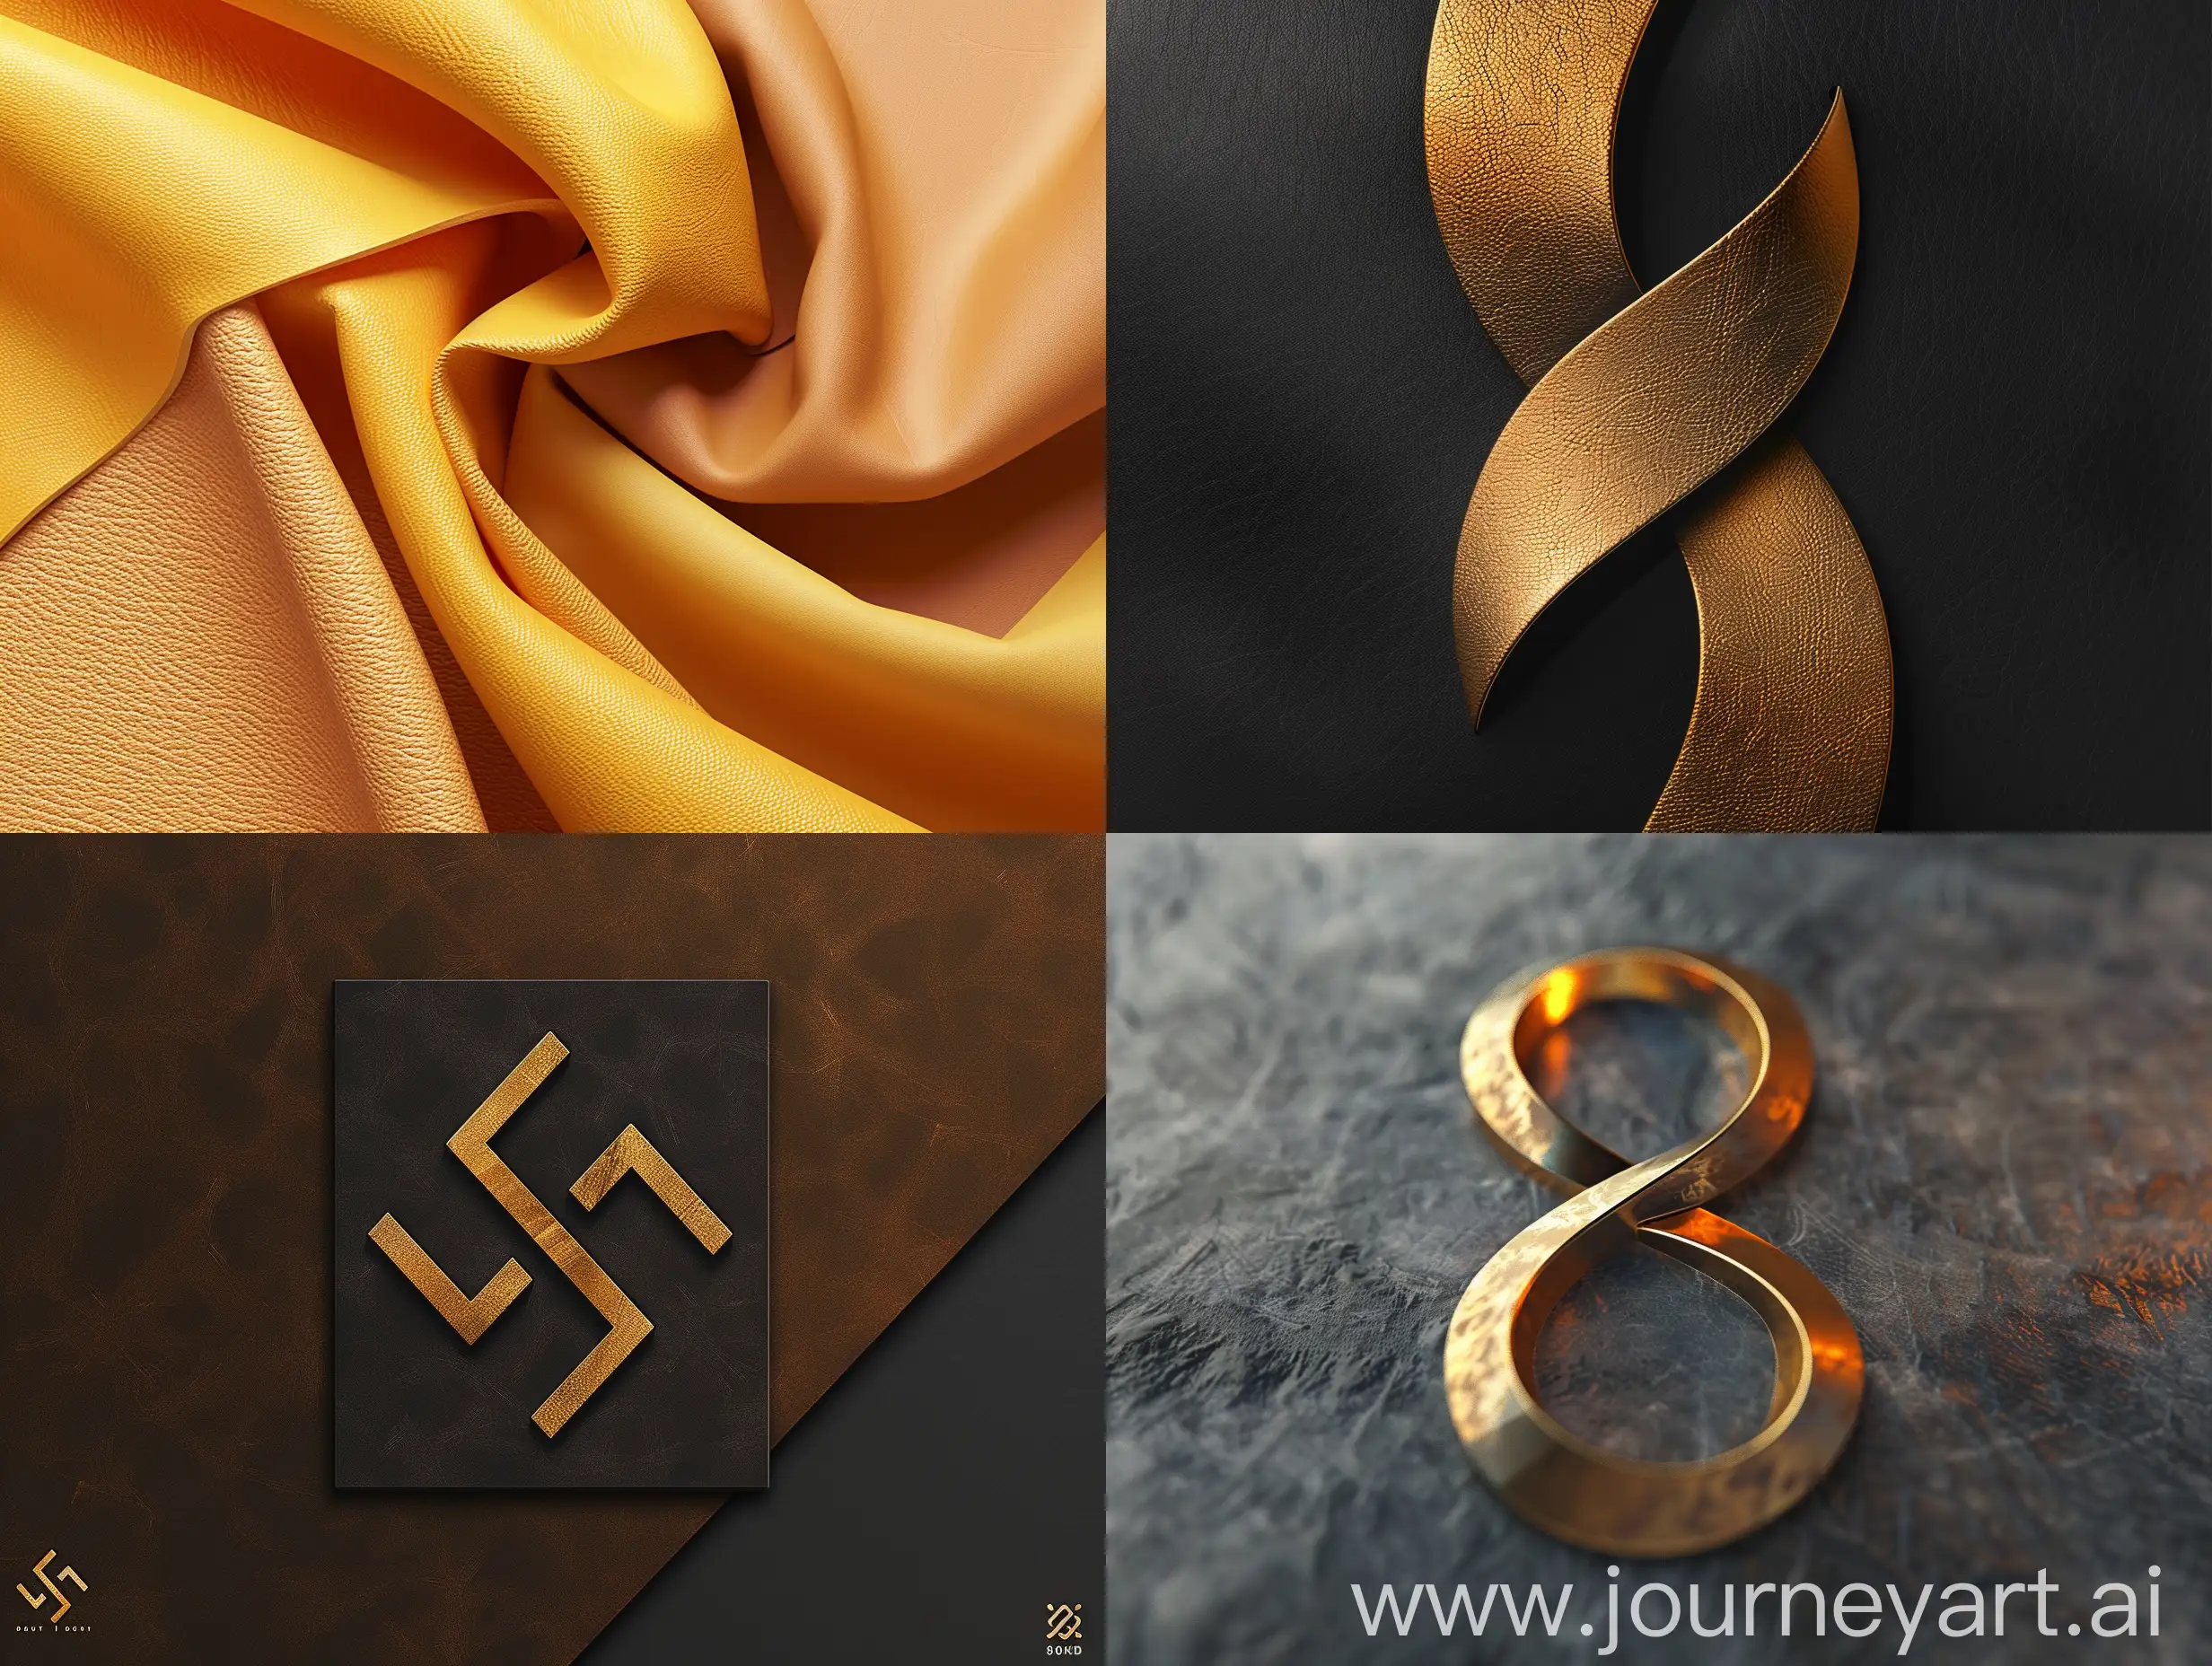 The logo designed for leather products contains the colors #B97C11 for deep and rich gold and #b96011 for a bright and refreshing skin color. 8k